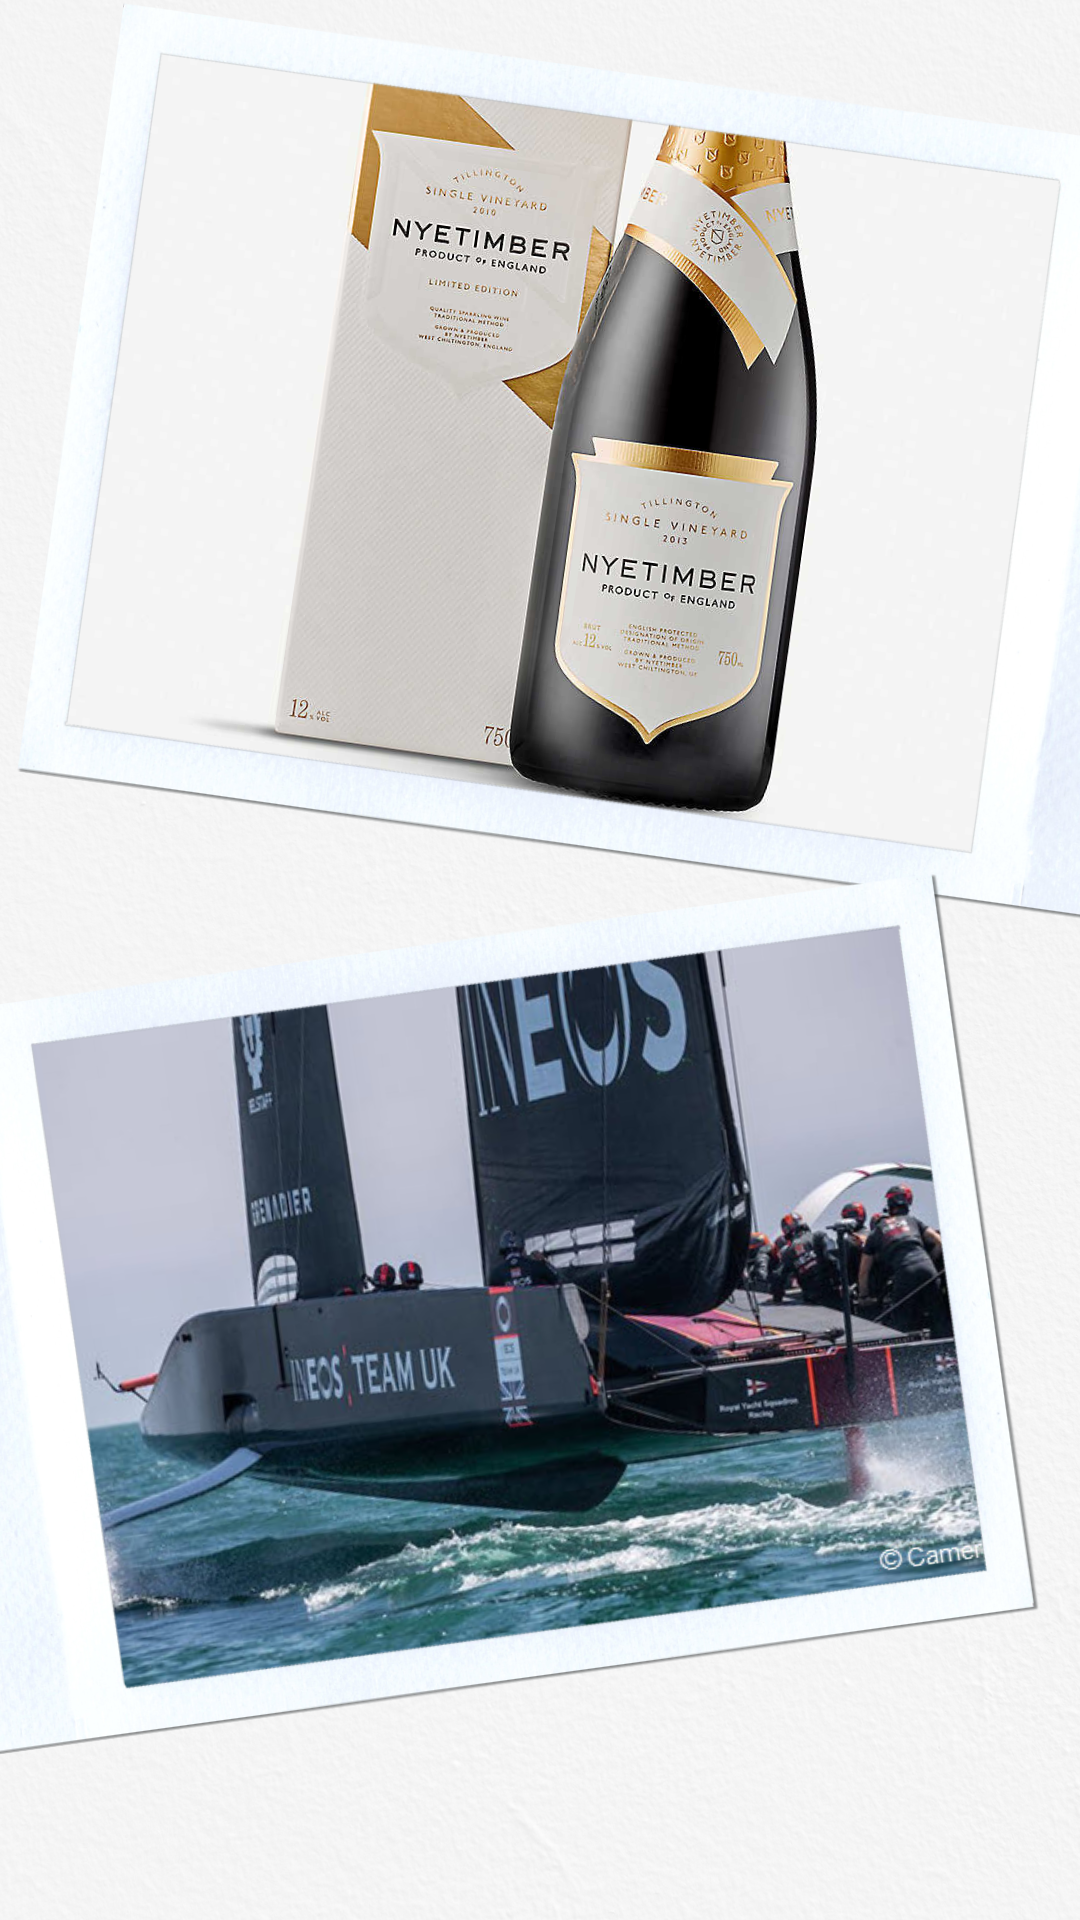 Nyetimber announces America’s Cup partnership with INEOS Britannia